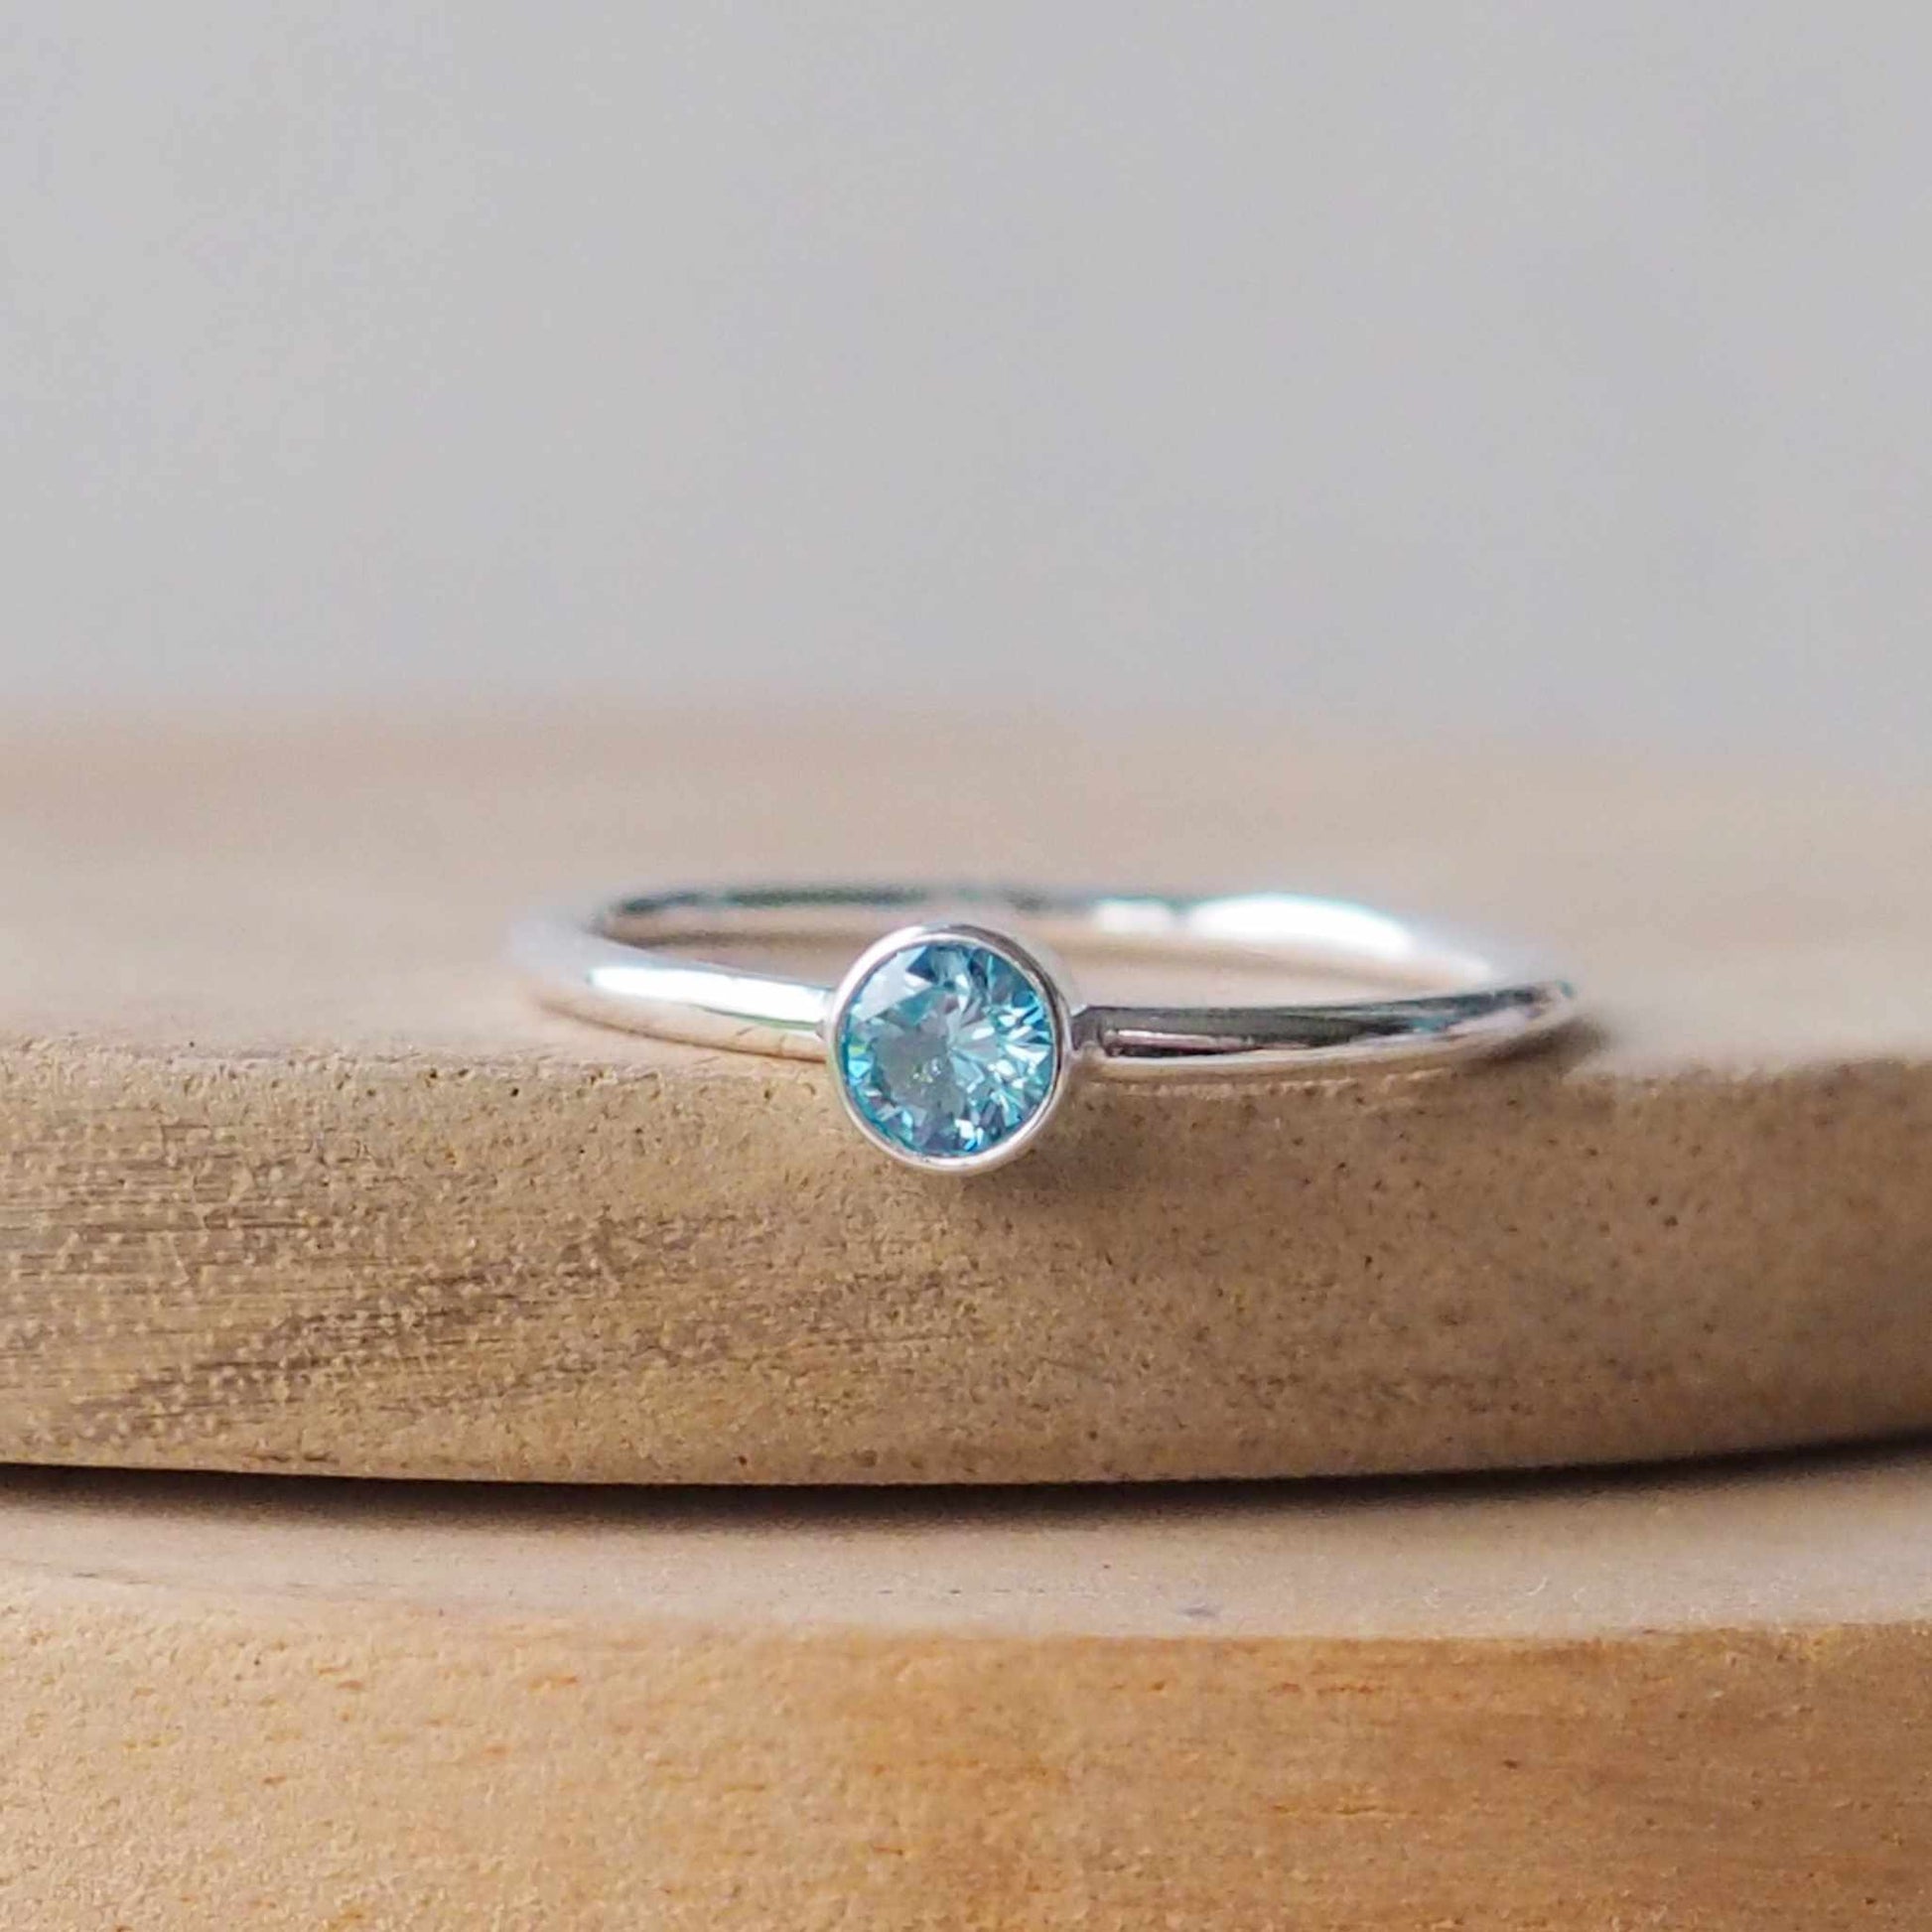 Sparkly aqua gemstone ring on white metal. Sterling Silver and Cubic zirconia ring made in a simple solitaire style with a 4mm round gemstone modern set in a fully enclosed surround. Handmade in Scotland by maram jewellery